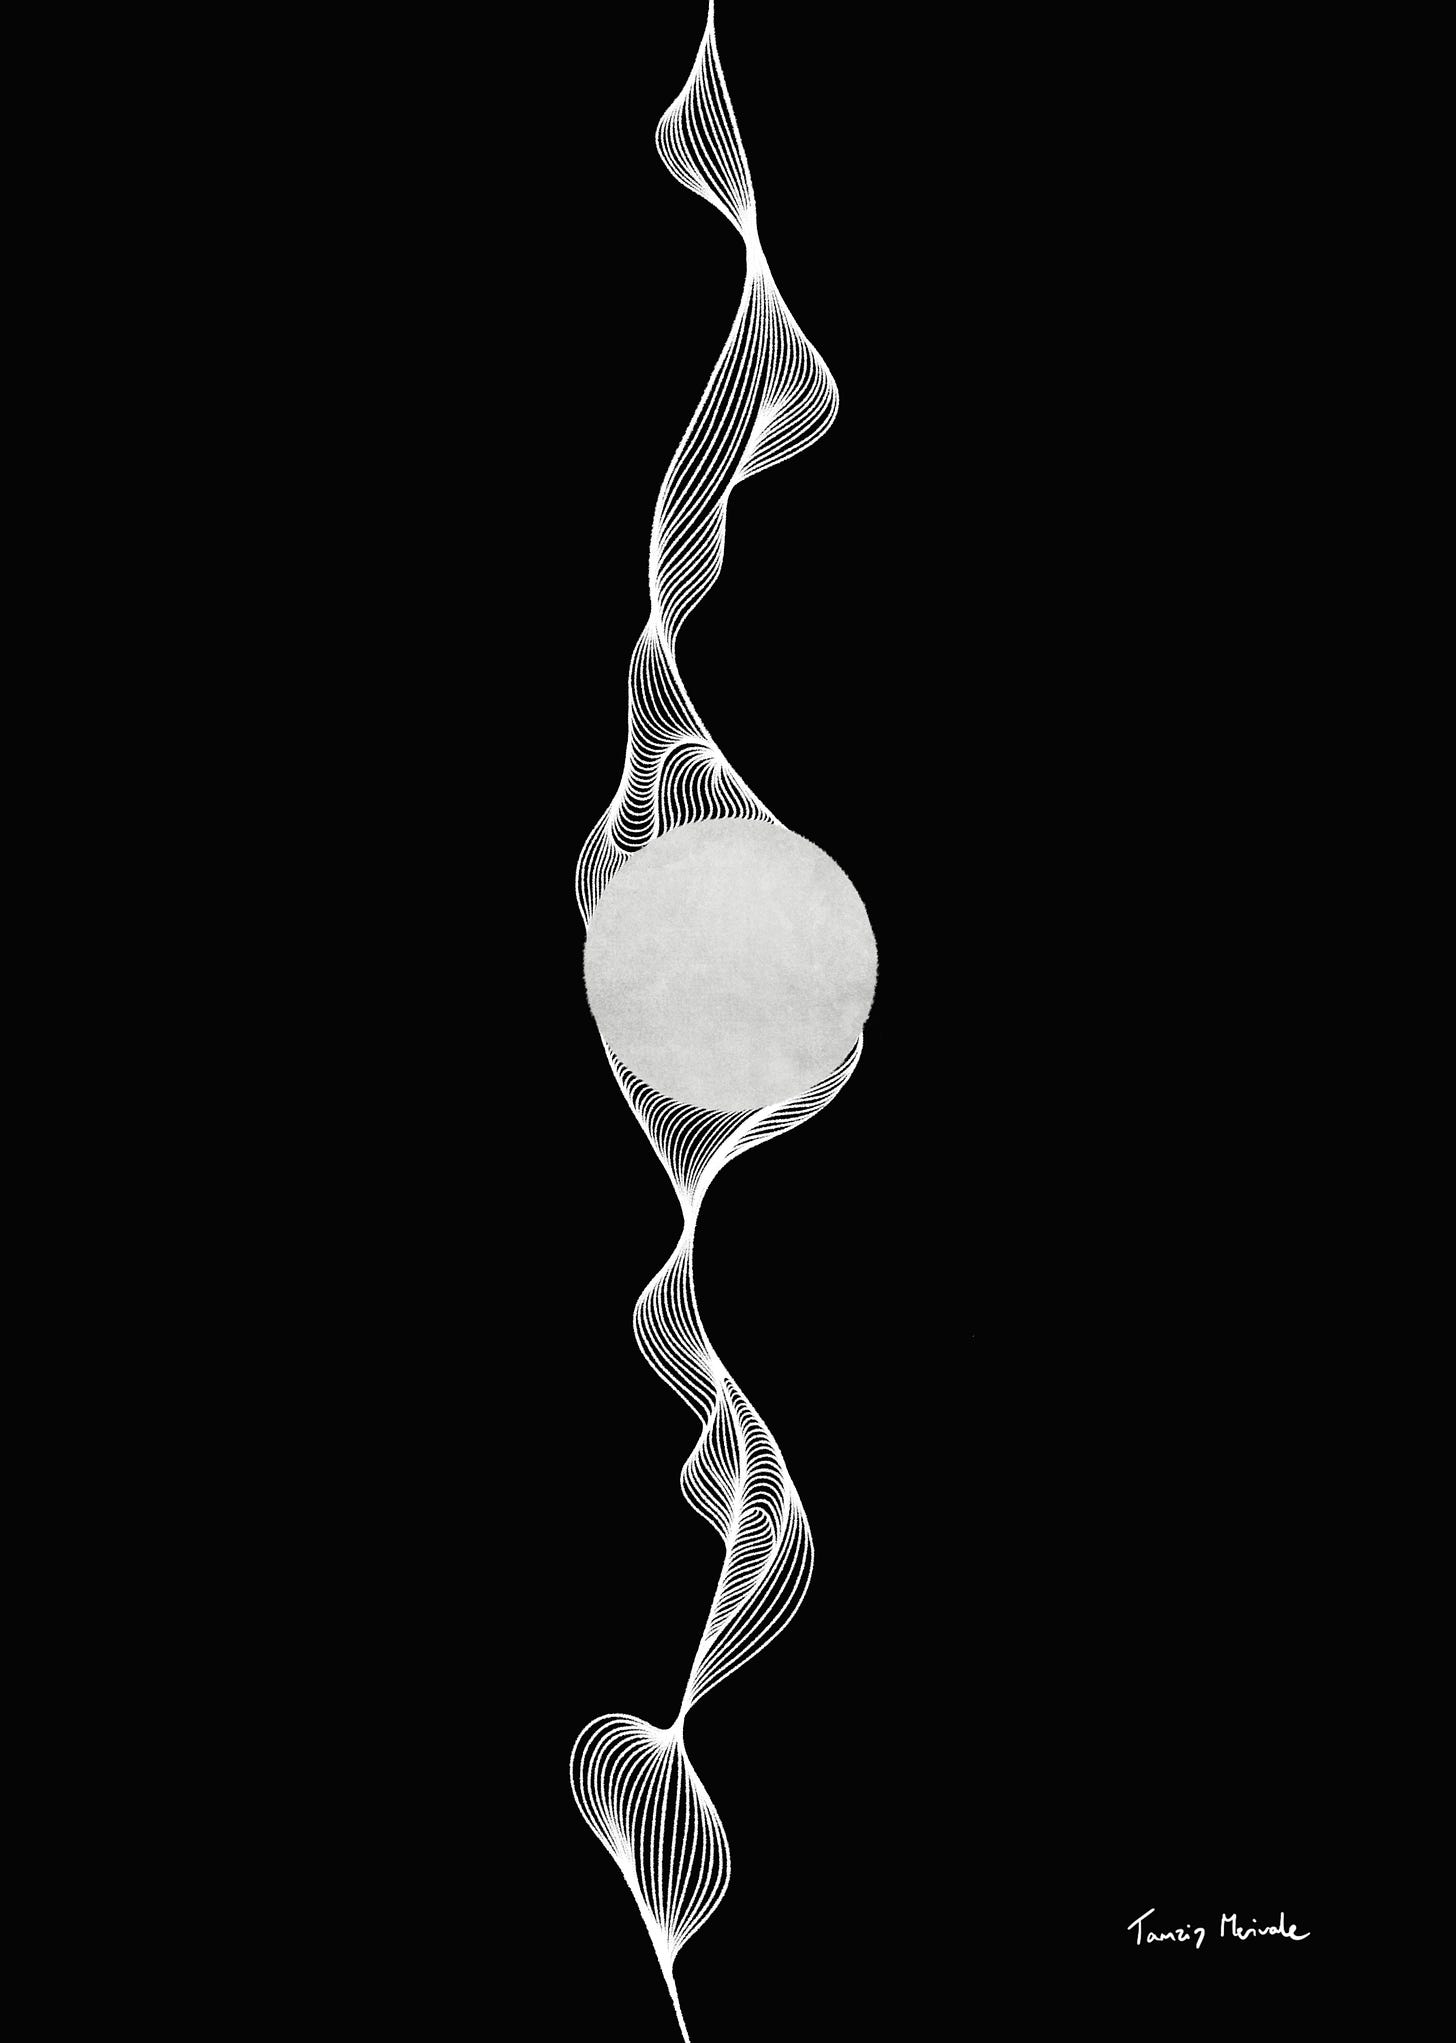 White lines in the centre drawn on a black background, with a circle in the middle. Artwork depicting smoke, energy or light in the darkness